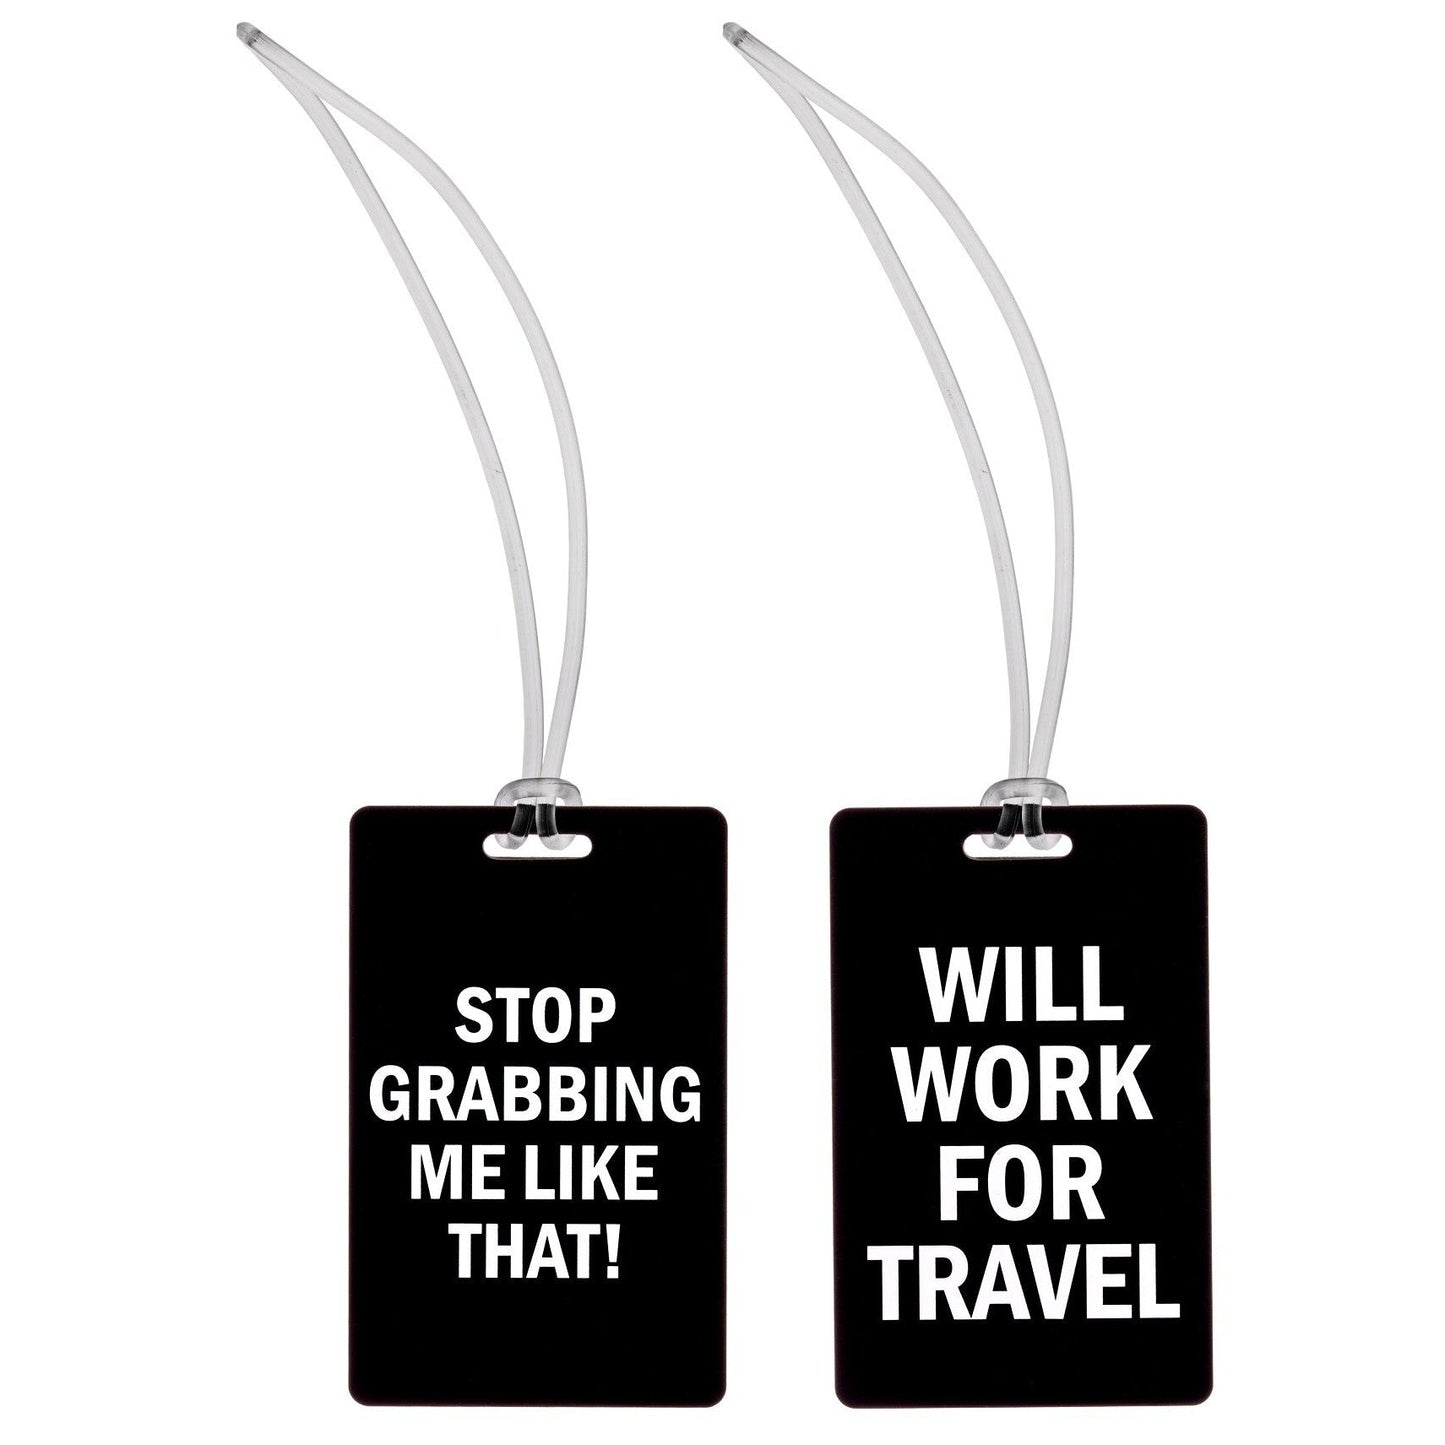 Stop Grabbing Me Like That! + Will Work For Travel Luggage Tag in Black and White